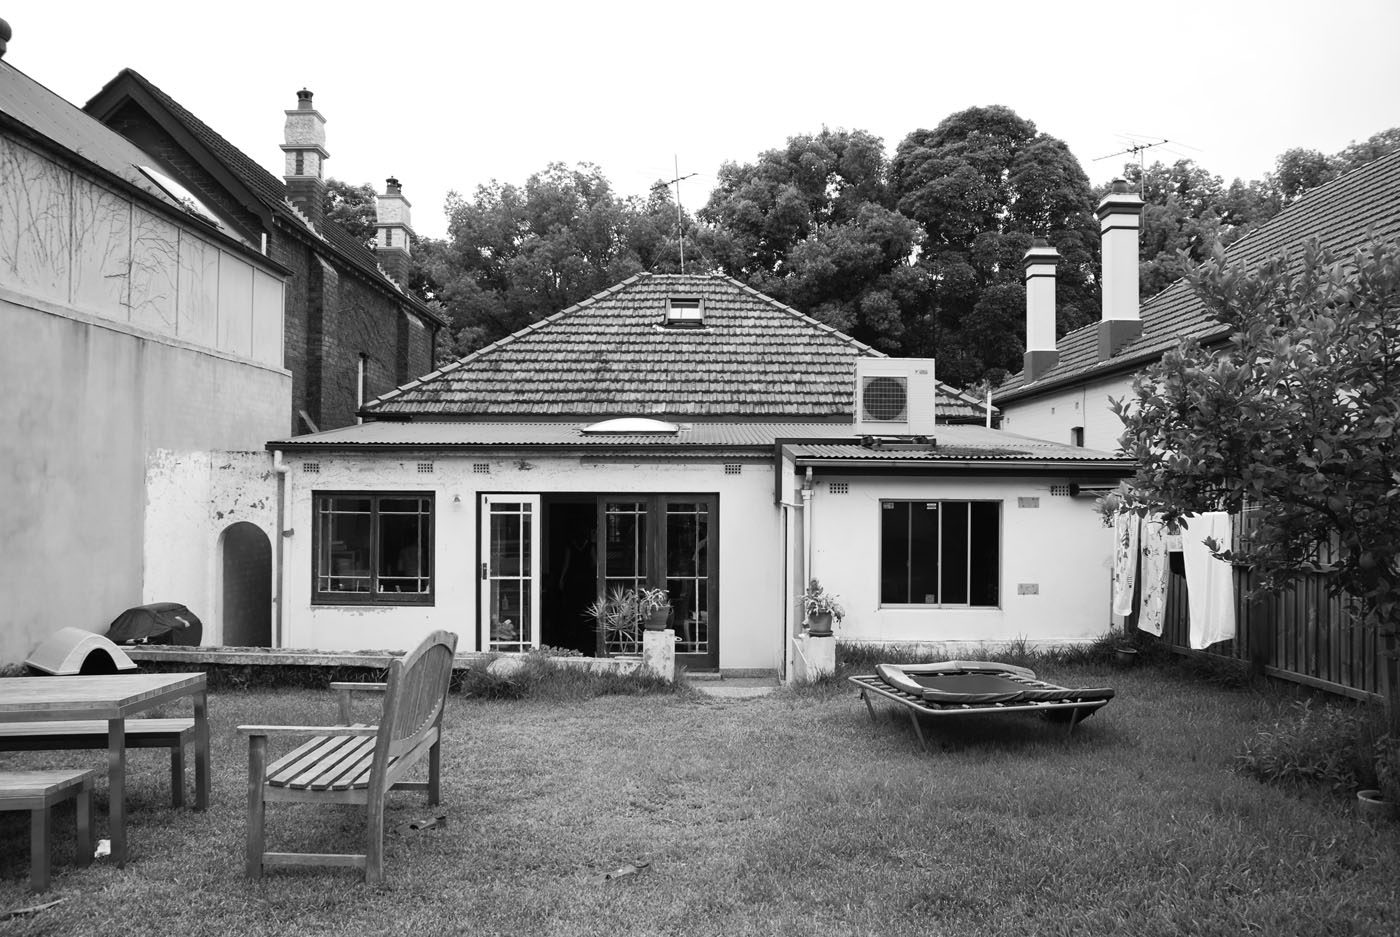 Photo of the house before the renovation